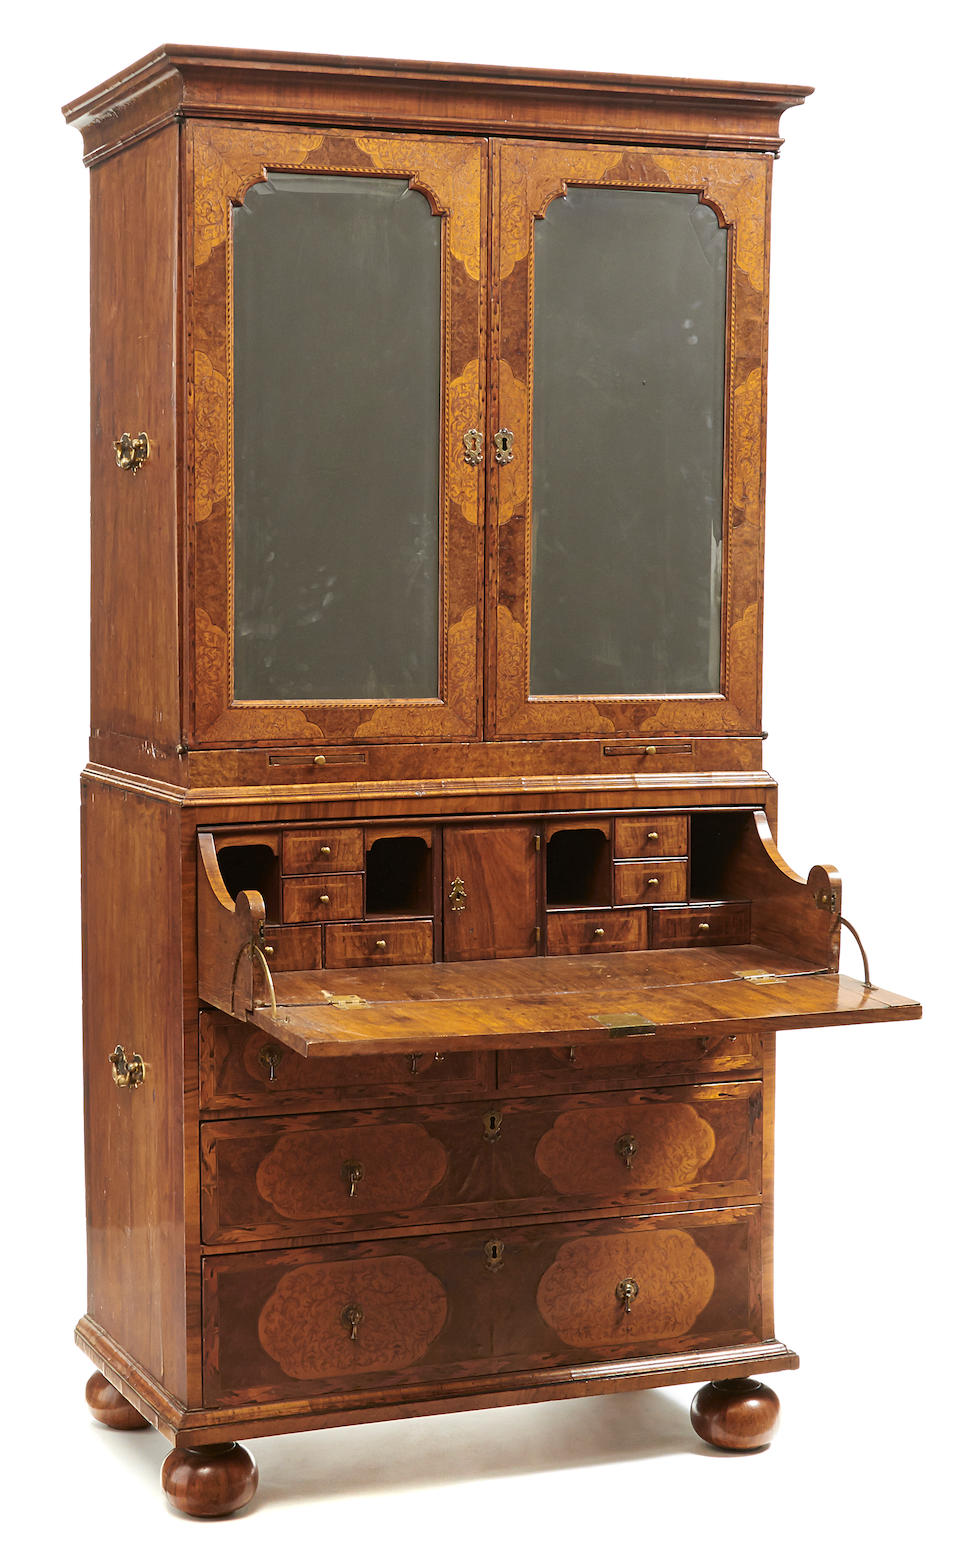 A William and Mary seaweed marquetry walnut secretary cabinet late 17th century